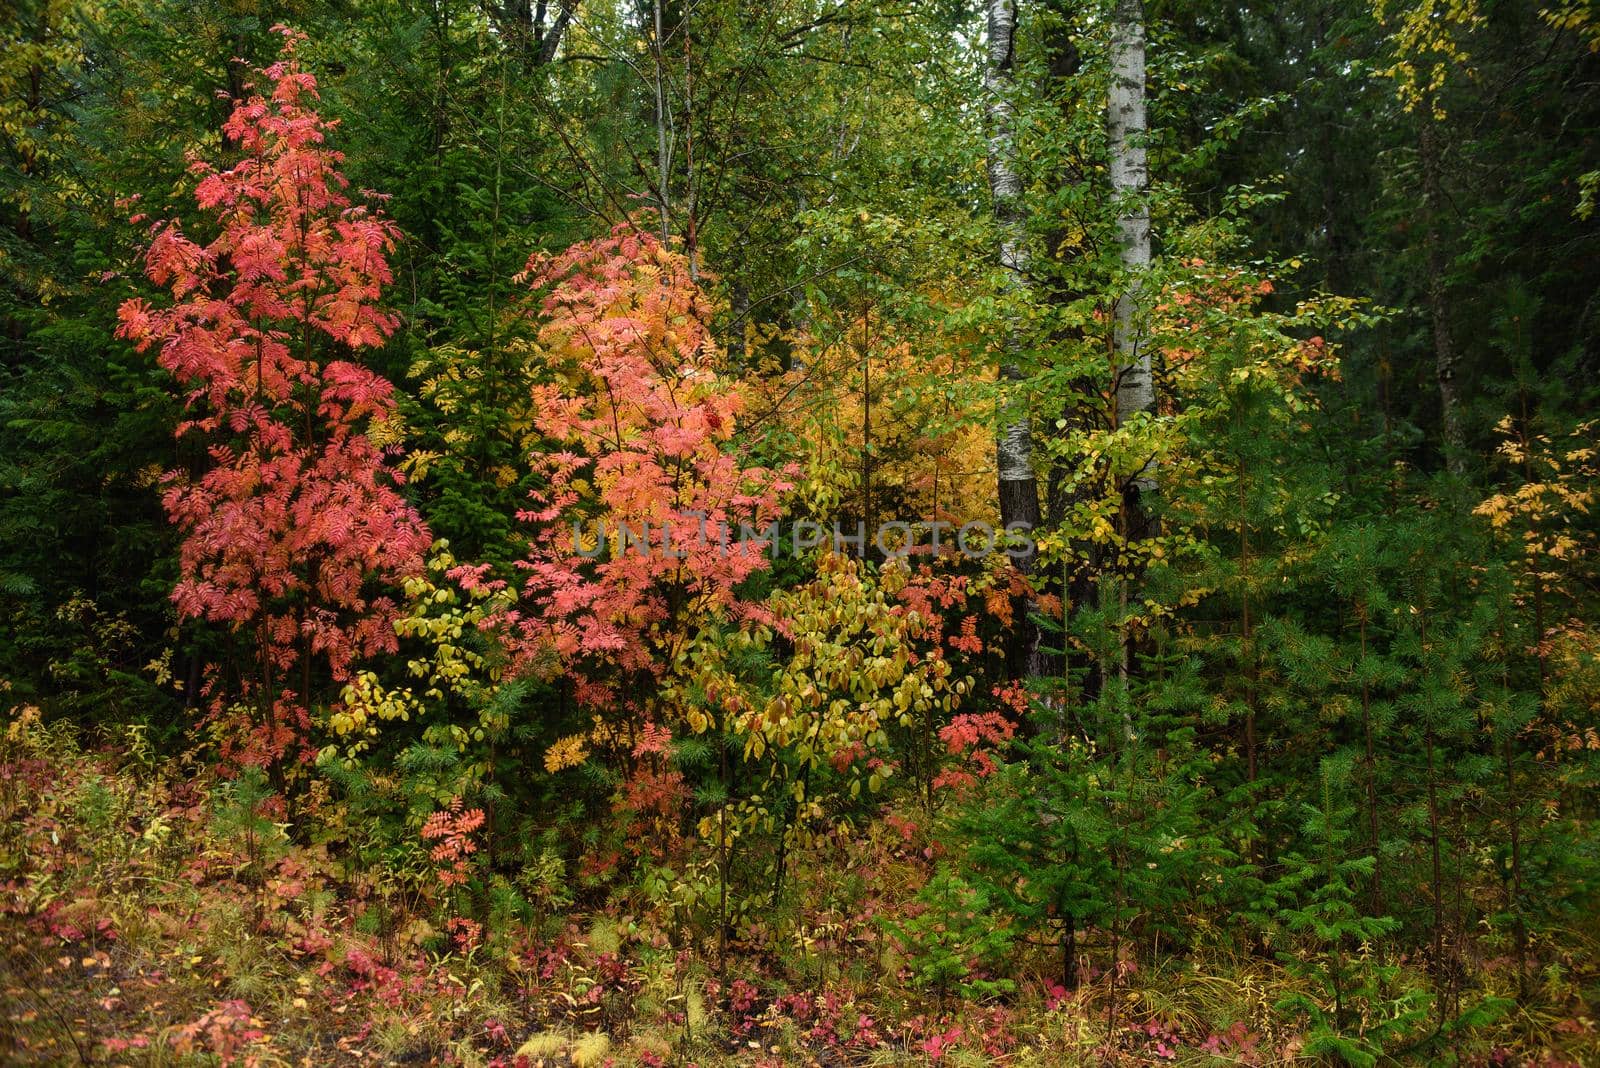 Colors of autumn. Landscape. Mixed forest. Colorful leaves and herbs in early autumn.